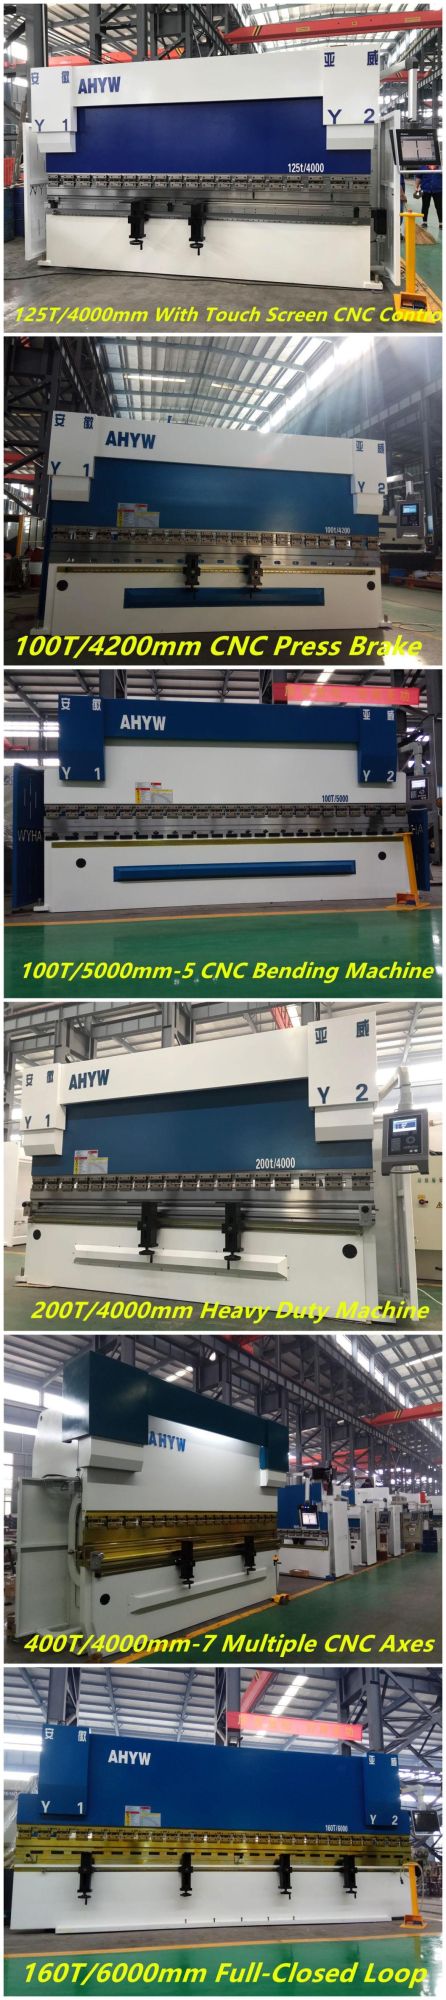 Pearson Press Brake From Anhui Yawei with Ahyw Logo for Metal Sheet Bending